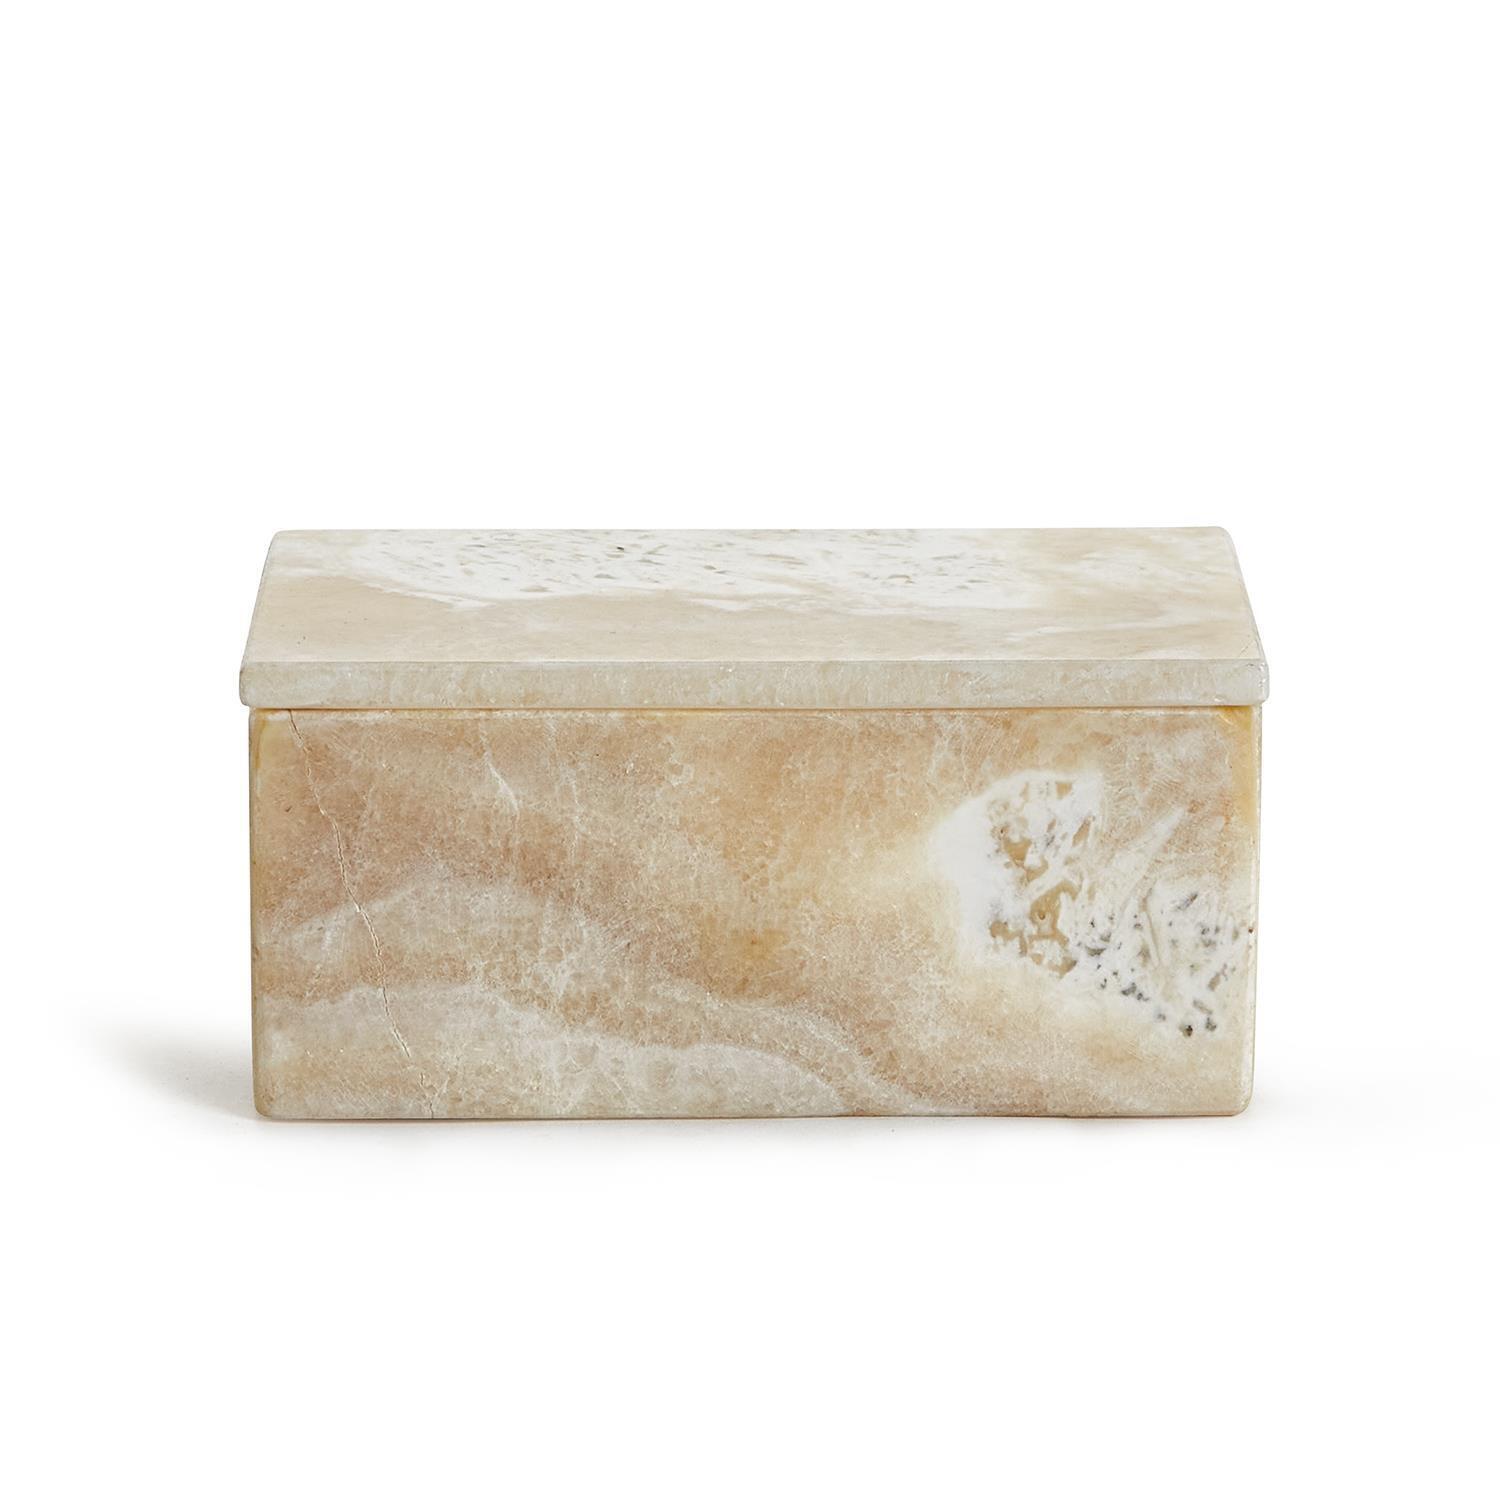 Two's Company White Onyx Rectangle Covered Box